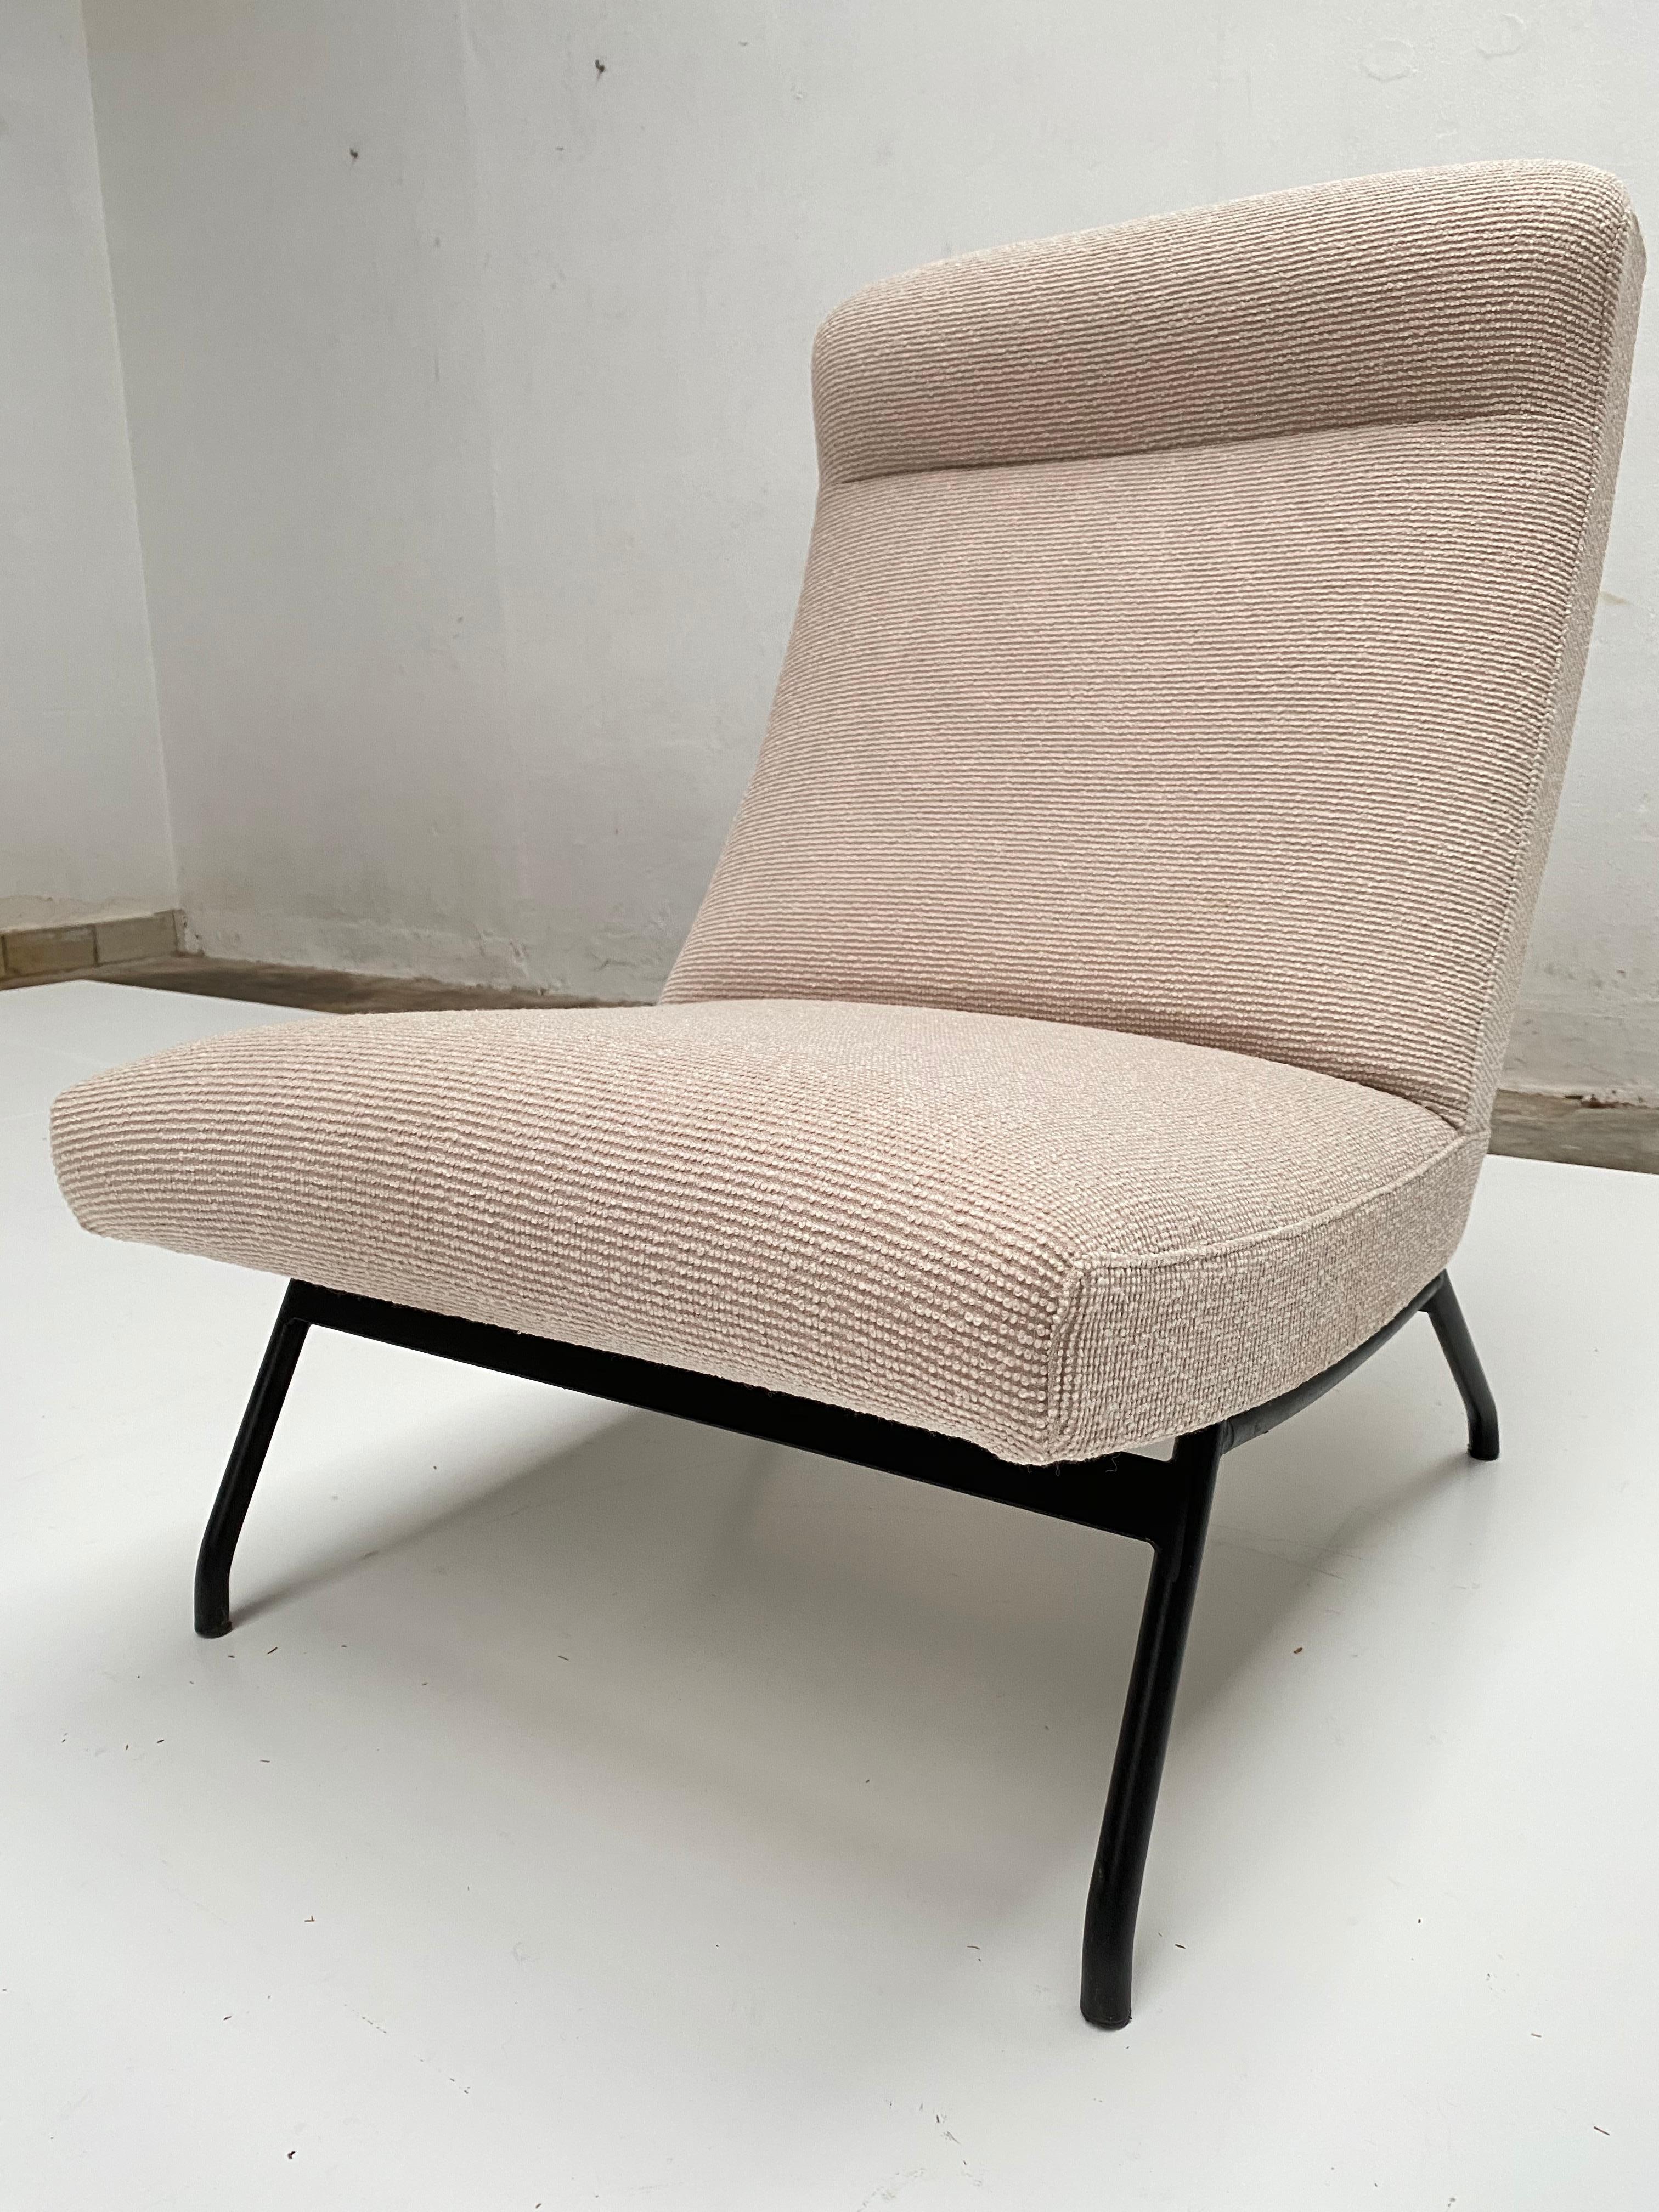 A French 1950s classic easy chair by Joseph Andre Motte for Steiner

We restored this lounge chair with new interior Latex rubber foam and a period matching De Ploeg wool fabric

Ready for a new home!

Photo's 8 to 14 show the chair unrestored